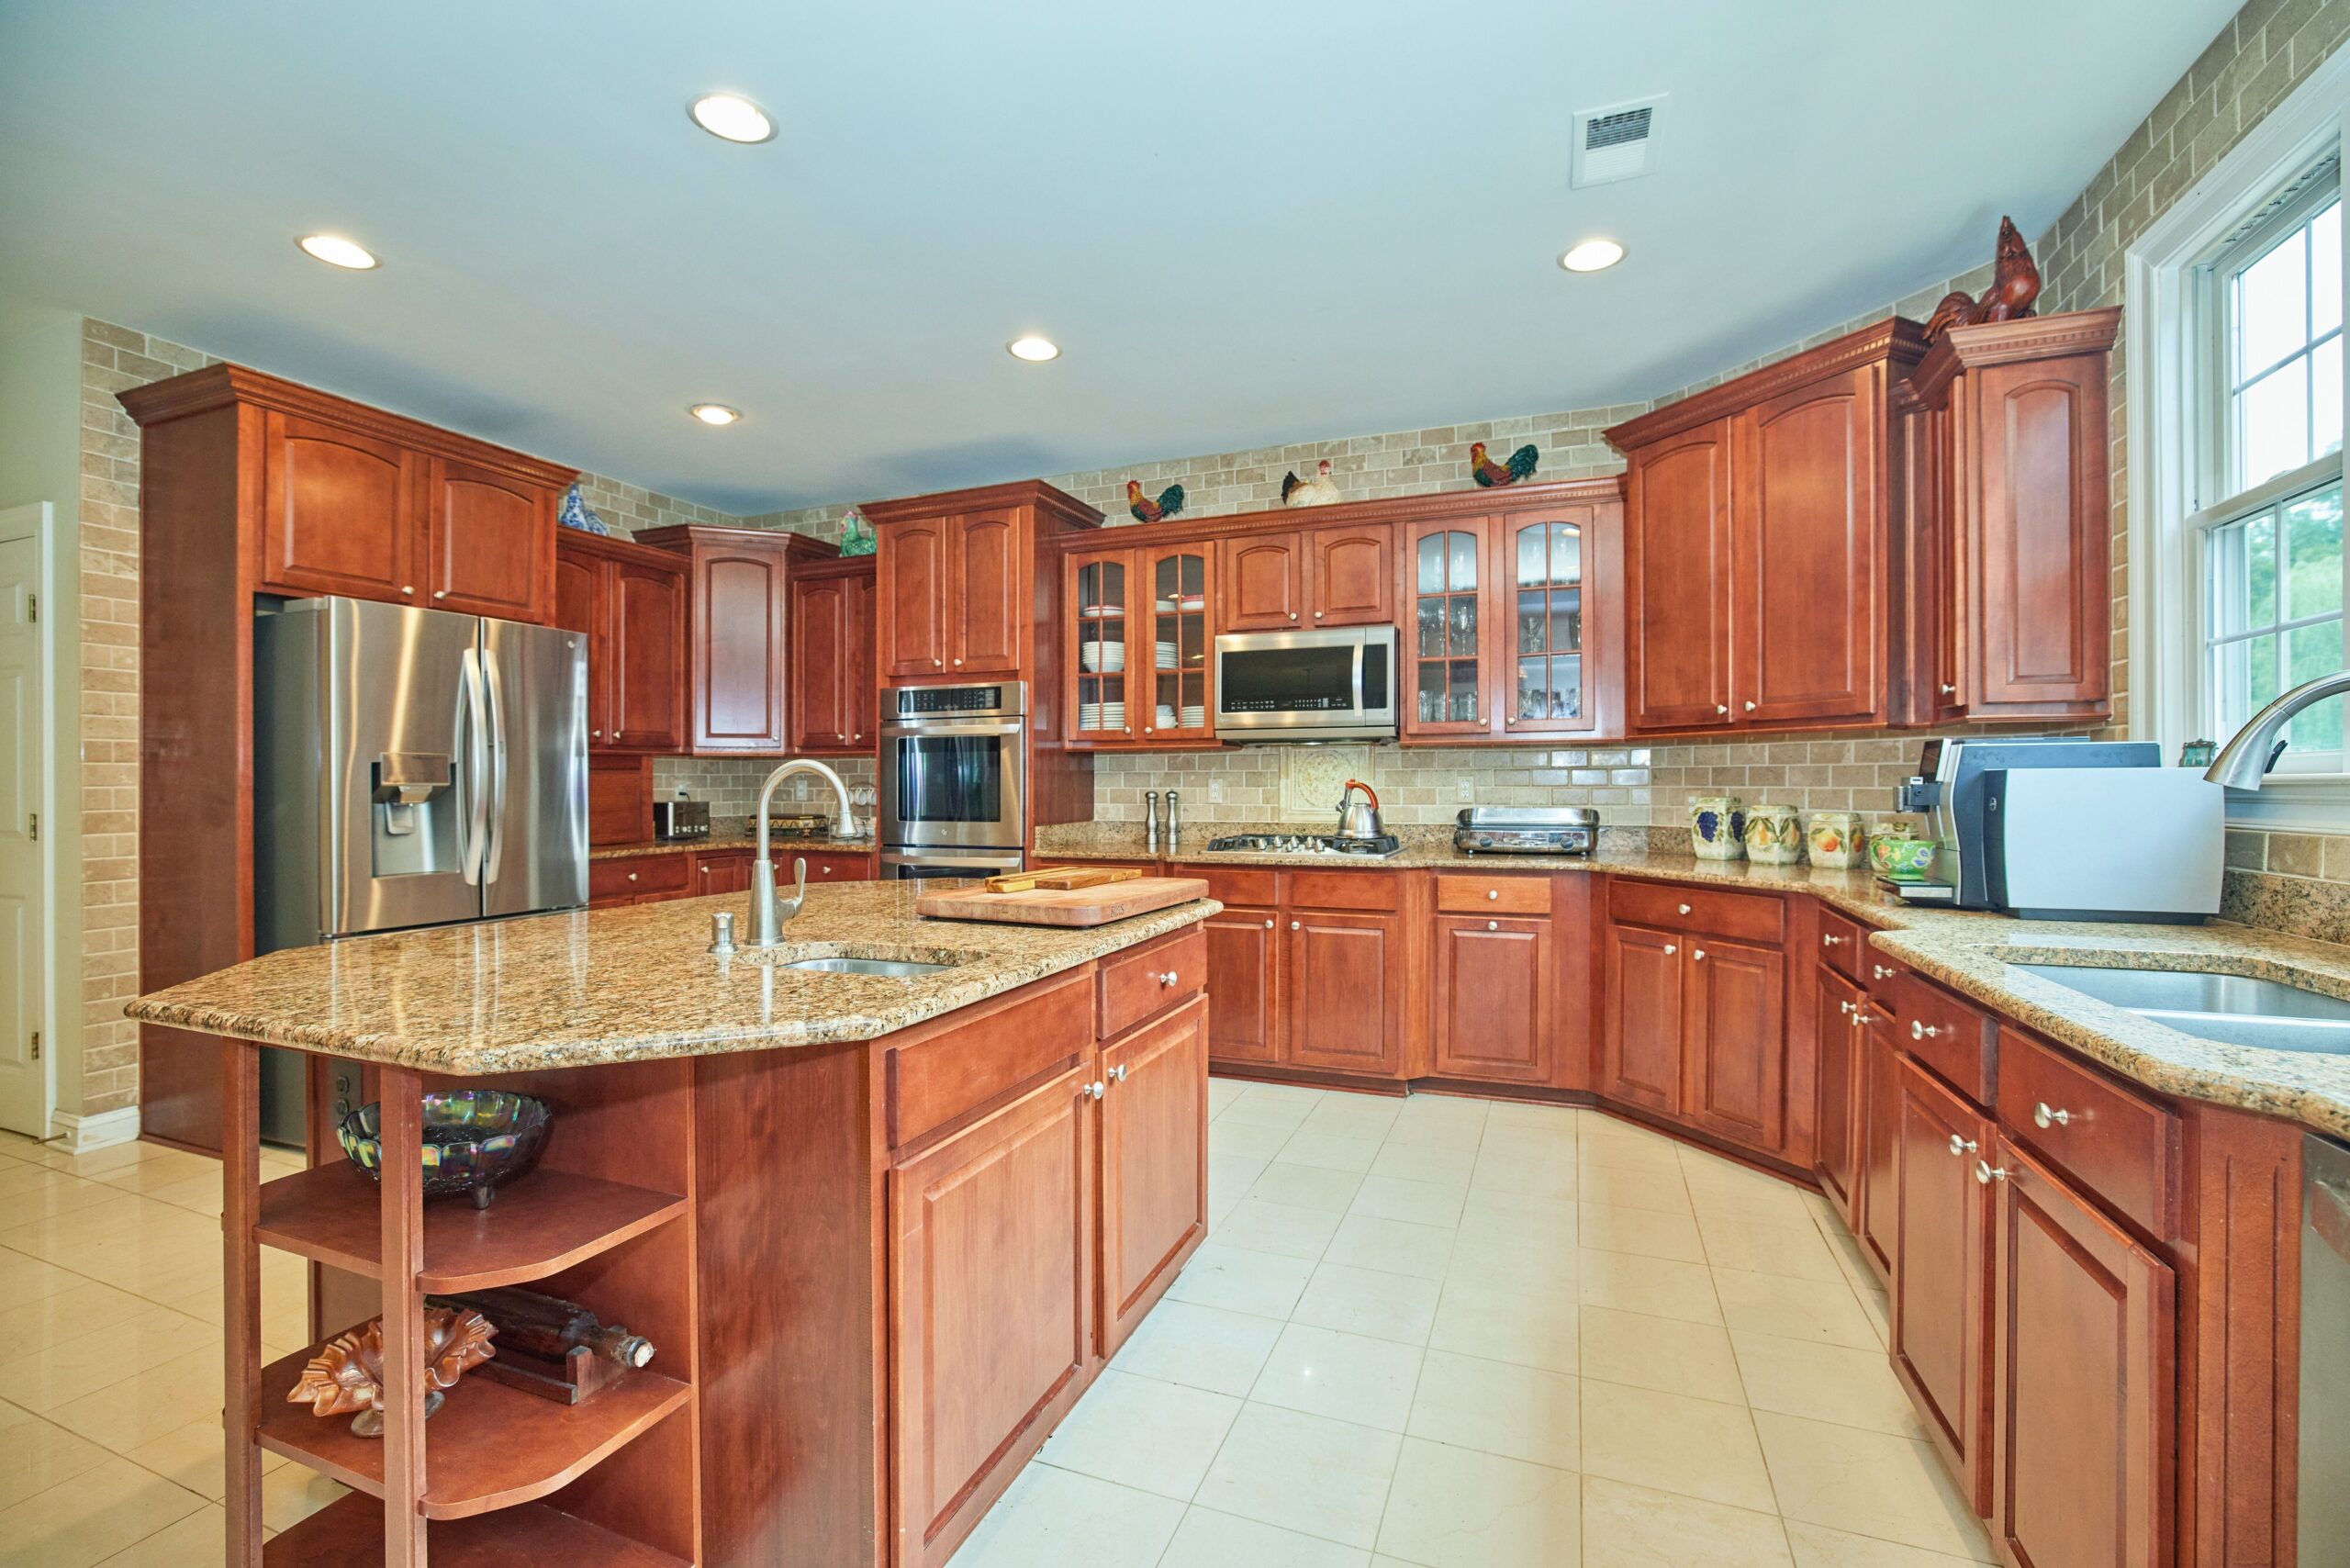 Flash photo of a large kitchen with walnut cabinets, brown granite counters and stainless appliances